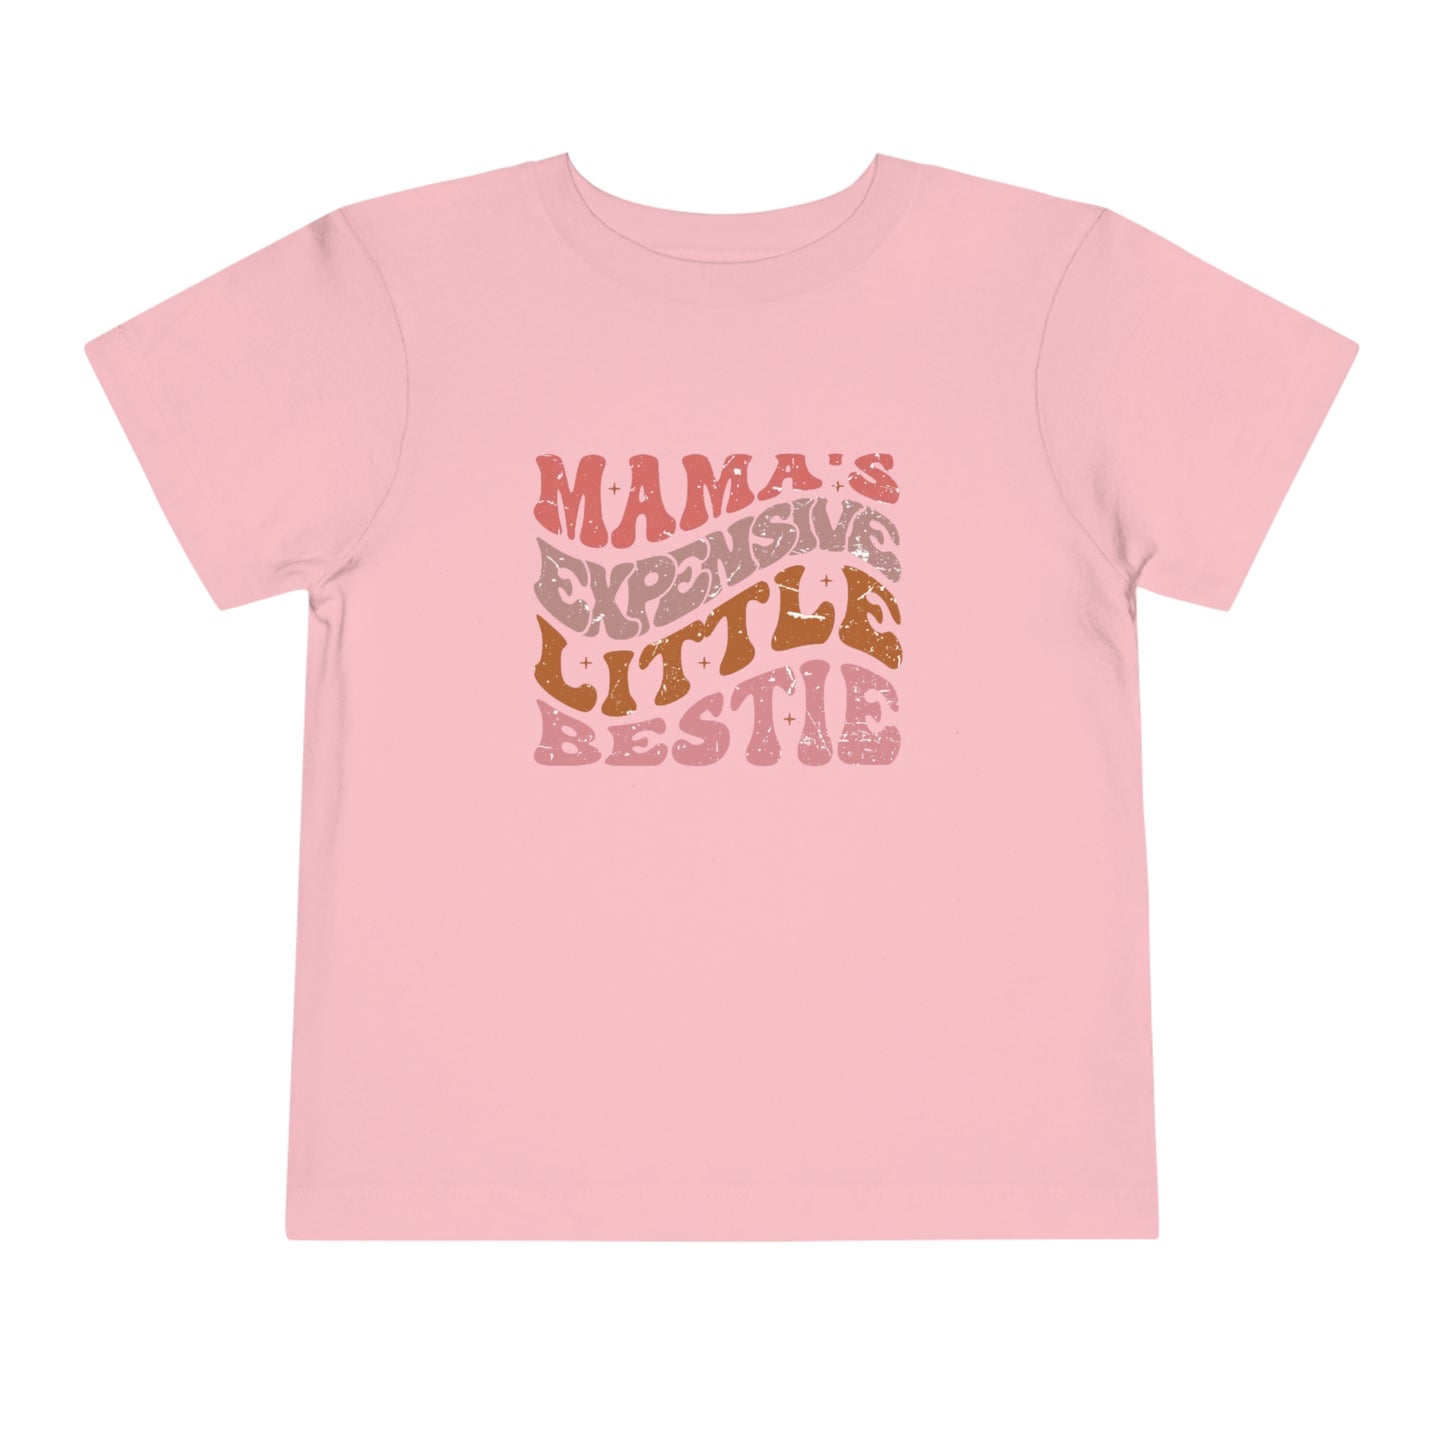 "Mama's Expensive Little Bestie" Toddler Short Sleeve Tee (2T-5T)